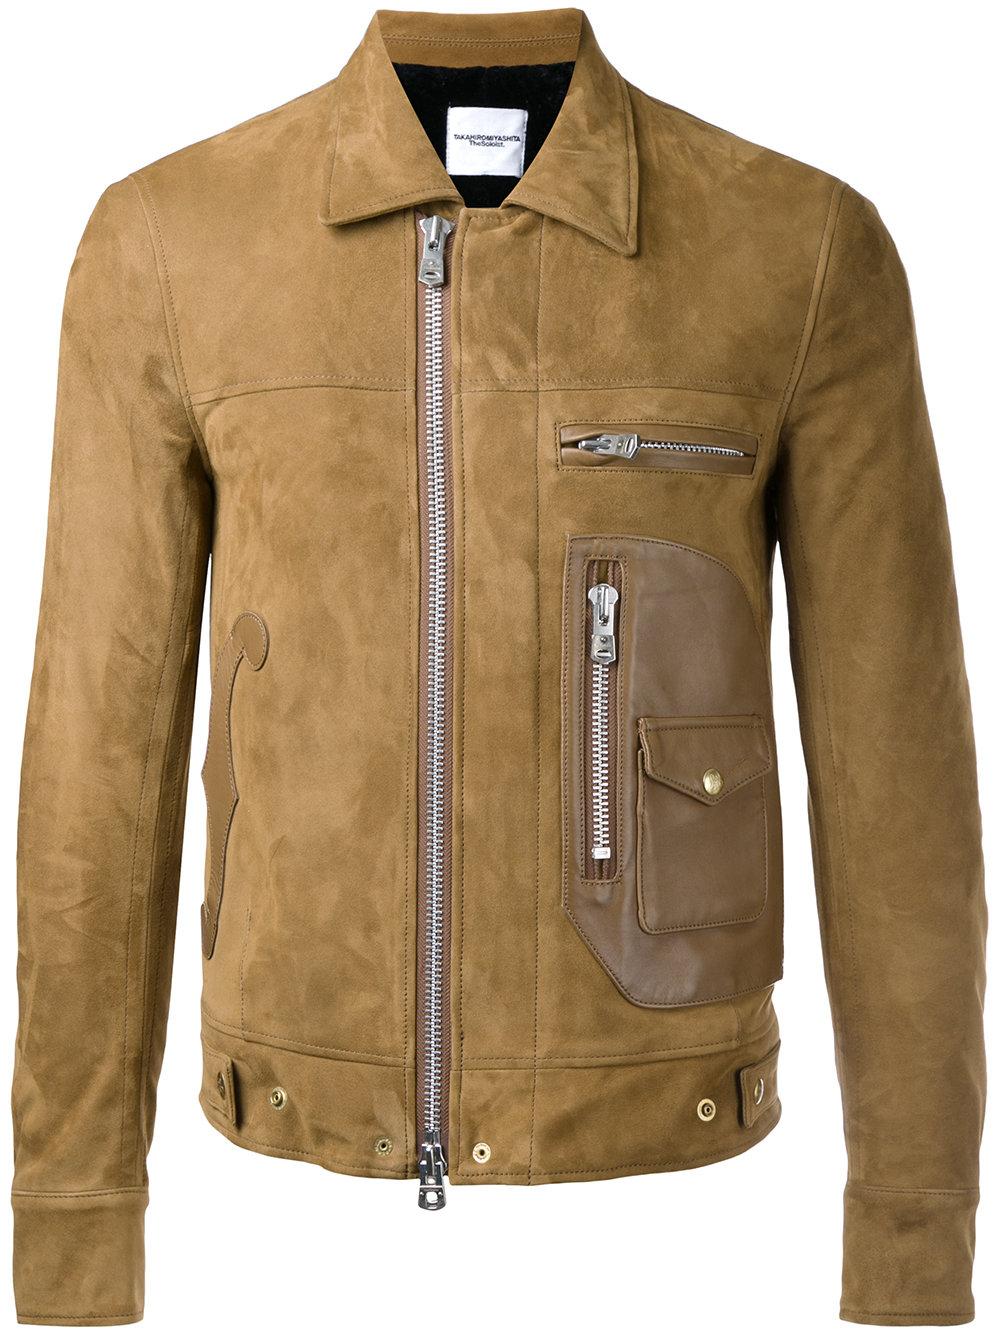 Top 15 Leather Jacket Brands for Men Reviews Prices More